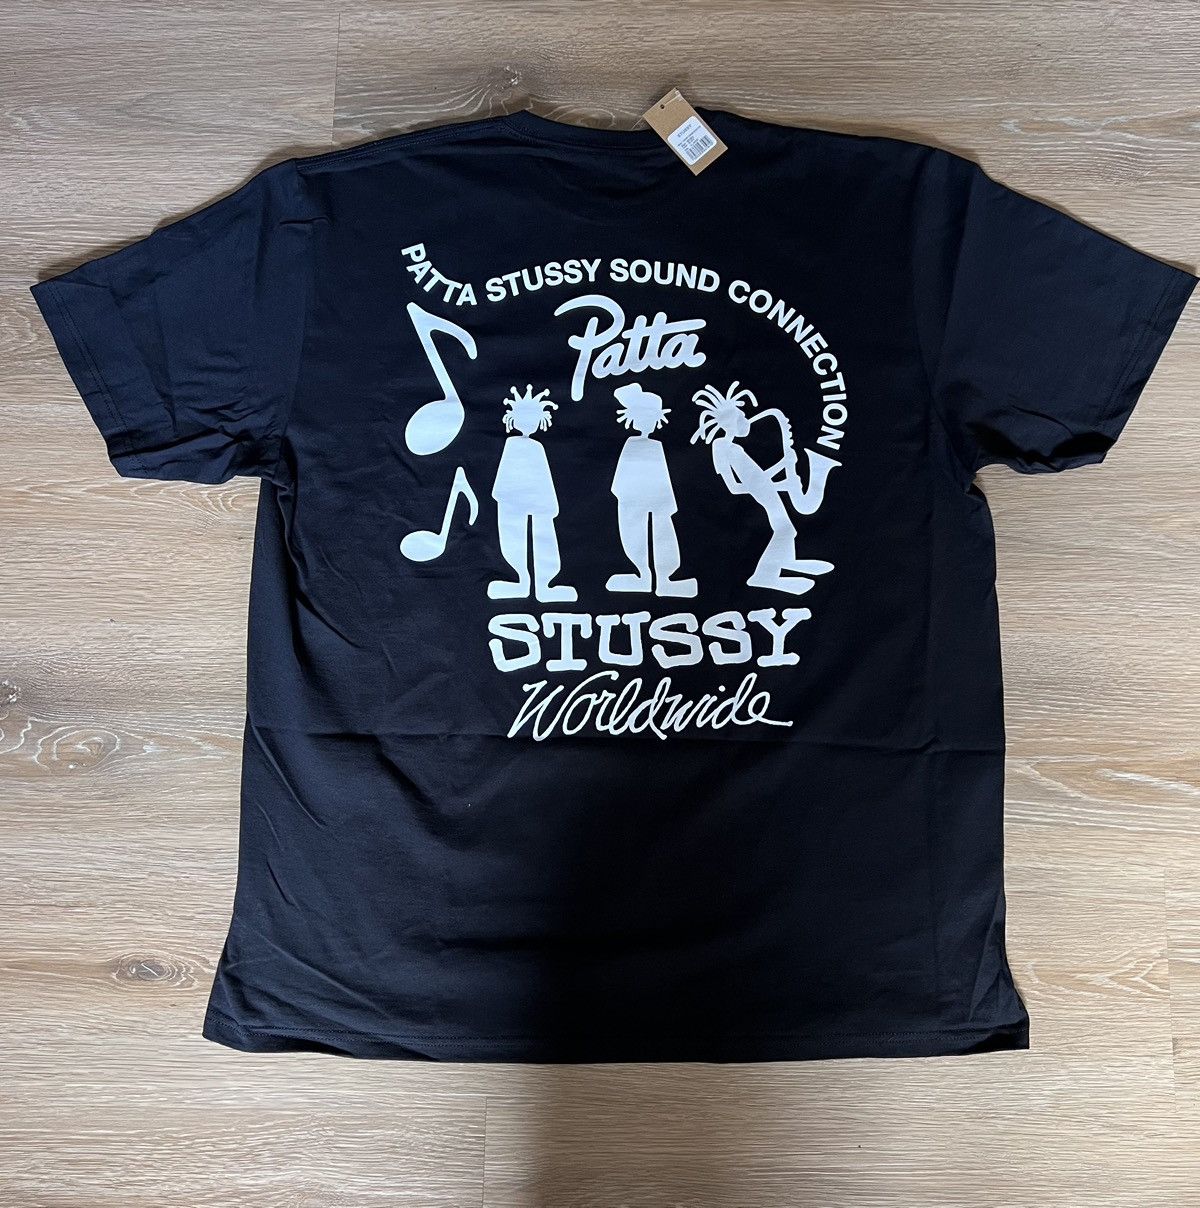 Stussy New Stussy Patta Sound Connection Tee Black Size XL IN HAND | Grailed